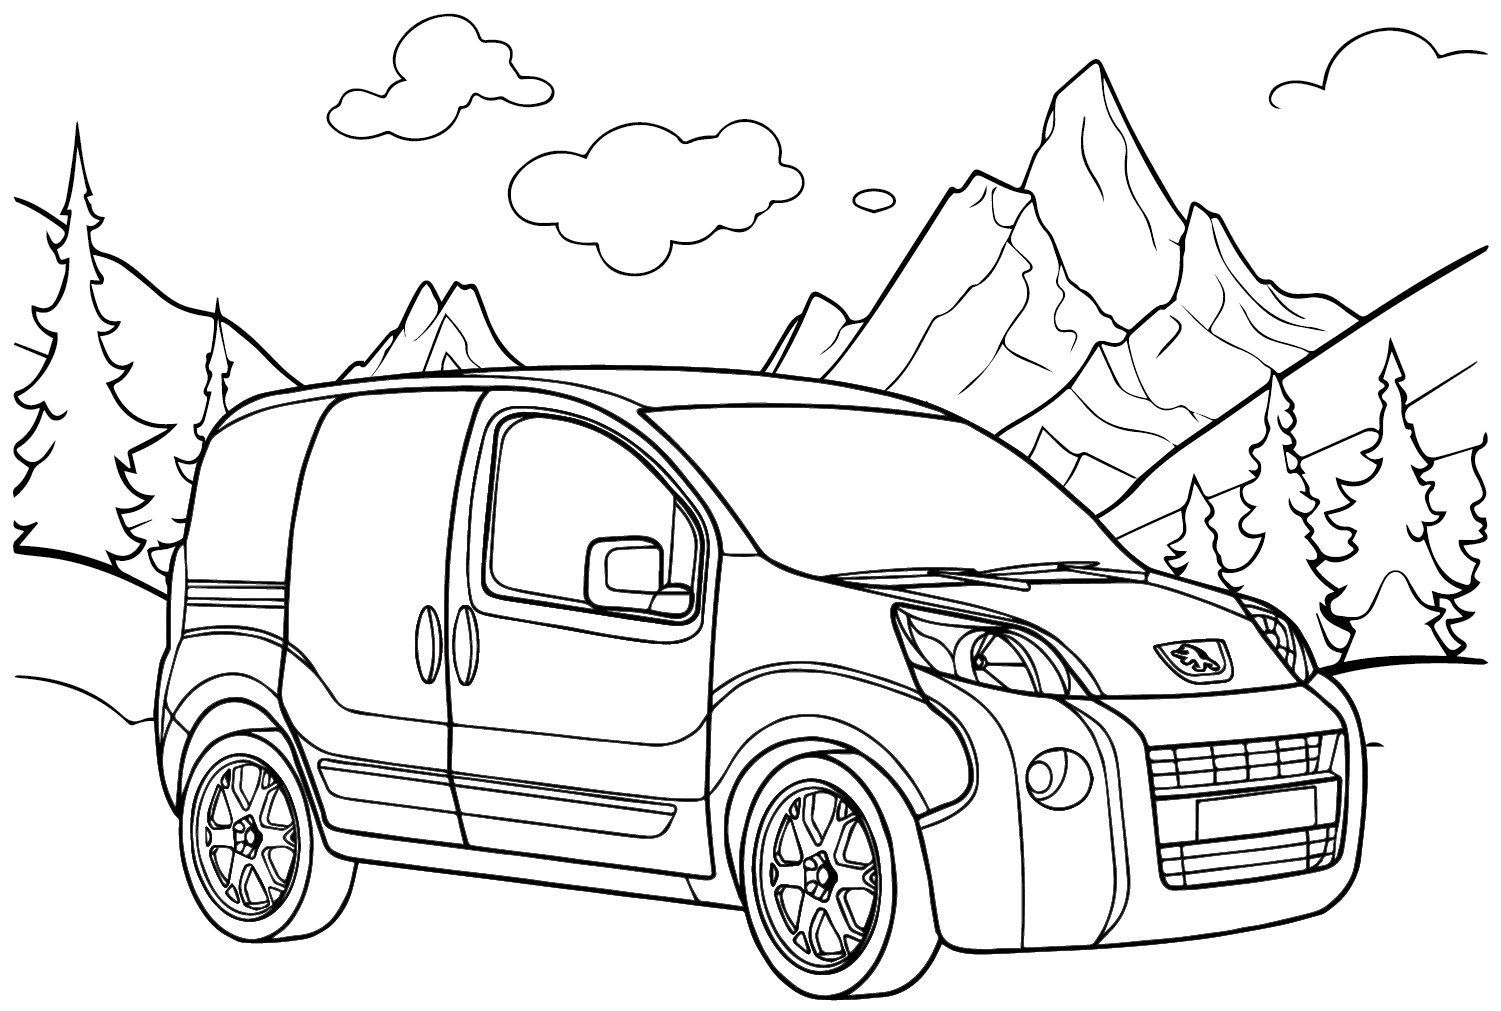 Peugeot Bipper Coloring Page from Peugeot